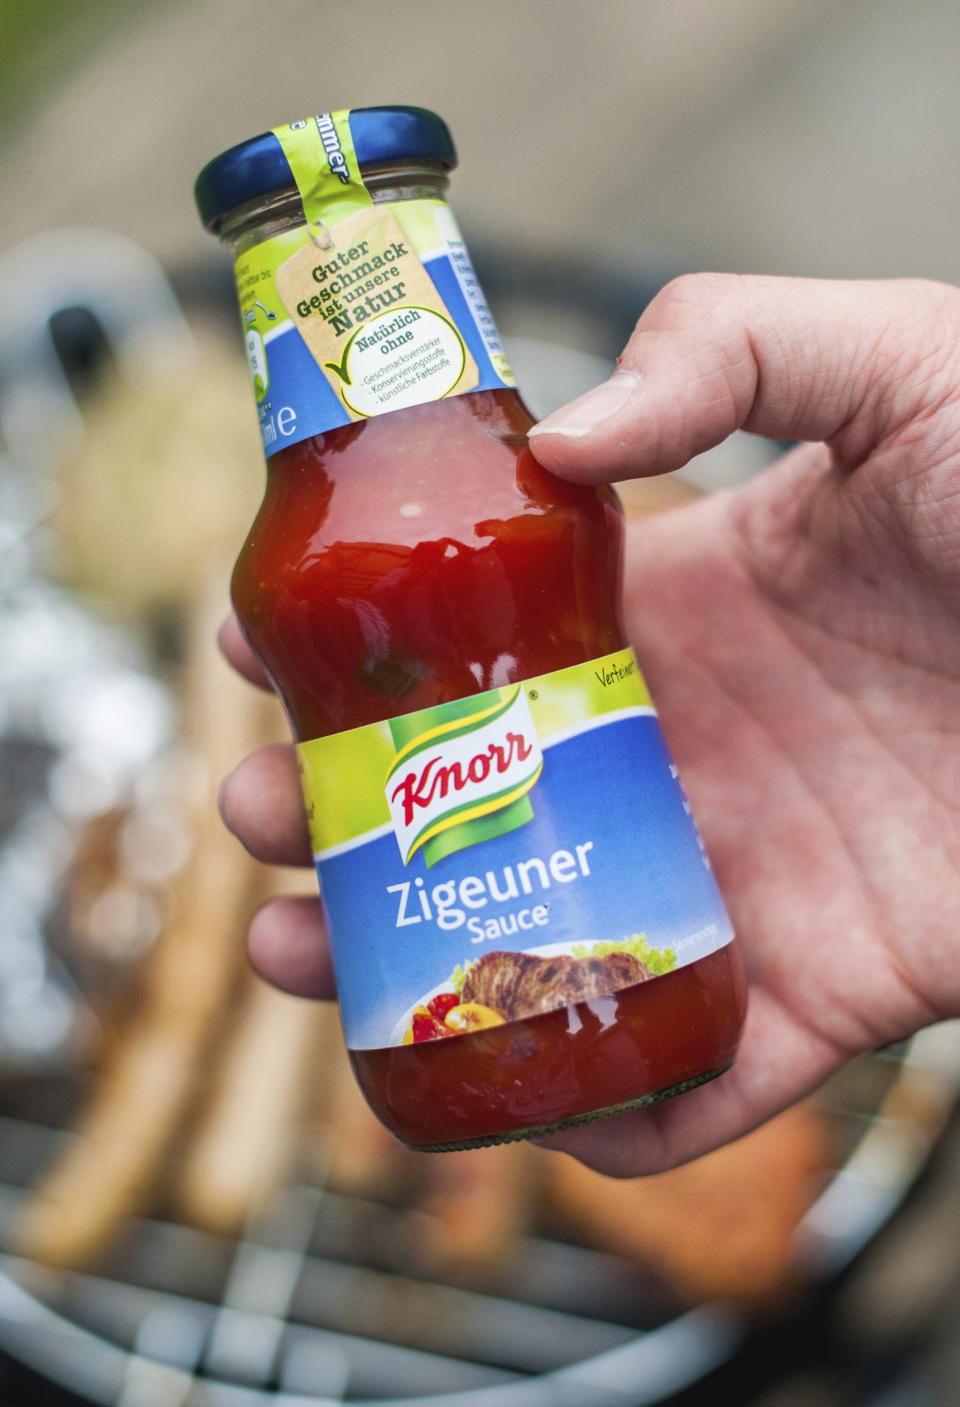 FILE- In this May 6, 2014 taken photo a man holds a bottle of &quot;gypsy sauce&quot; from the manufacturer Knorr in his hand in Berlin, Germany. One of Germany&#39;s best-known food brands has renamed a popular spicy dressing because of the racist connotations of the name. Knorr will change the name of its “Zigeuersauce,” or &quot;gypsy sauce&quot; to Paprika Sauce Hungarian Style,&quot; German weekly Bild am Sonntag reported on Sunday. (Hauke-Christian Dittrich/dpa via AP)